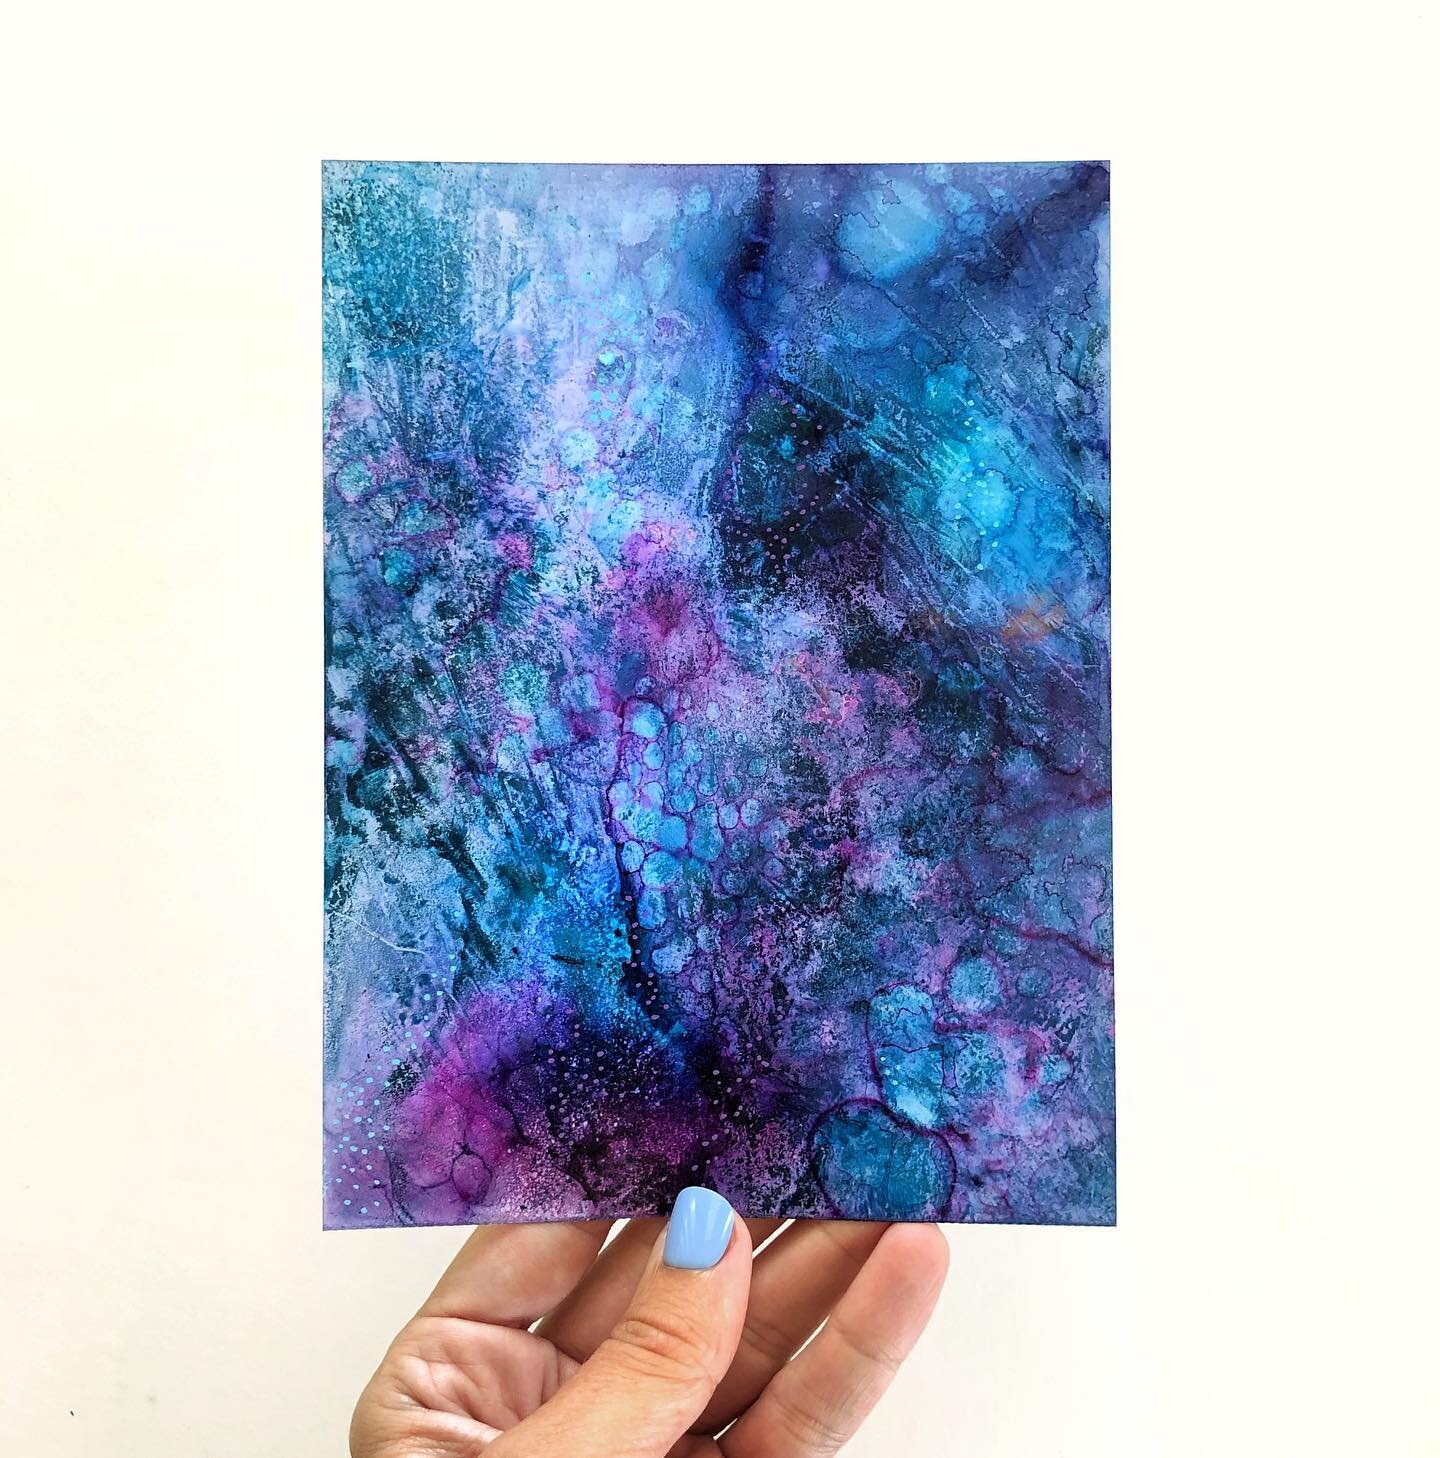 &lsquo;Be bold&rsquo; - 5x7 alcohol inks on yupo. Swipe to see the detail. This mini is $40 w/free shipping so holler if you&rsquo;d like it!

.
.
.
.
.
#inspirationoftheday #socalartist #fluidpainting #fluidart #copicink #rangerinks #rangerink #alco